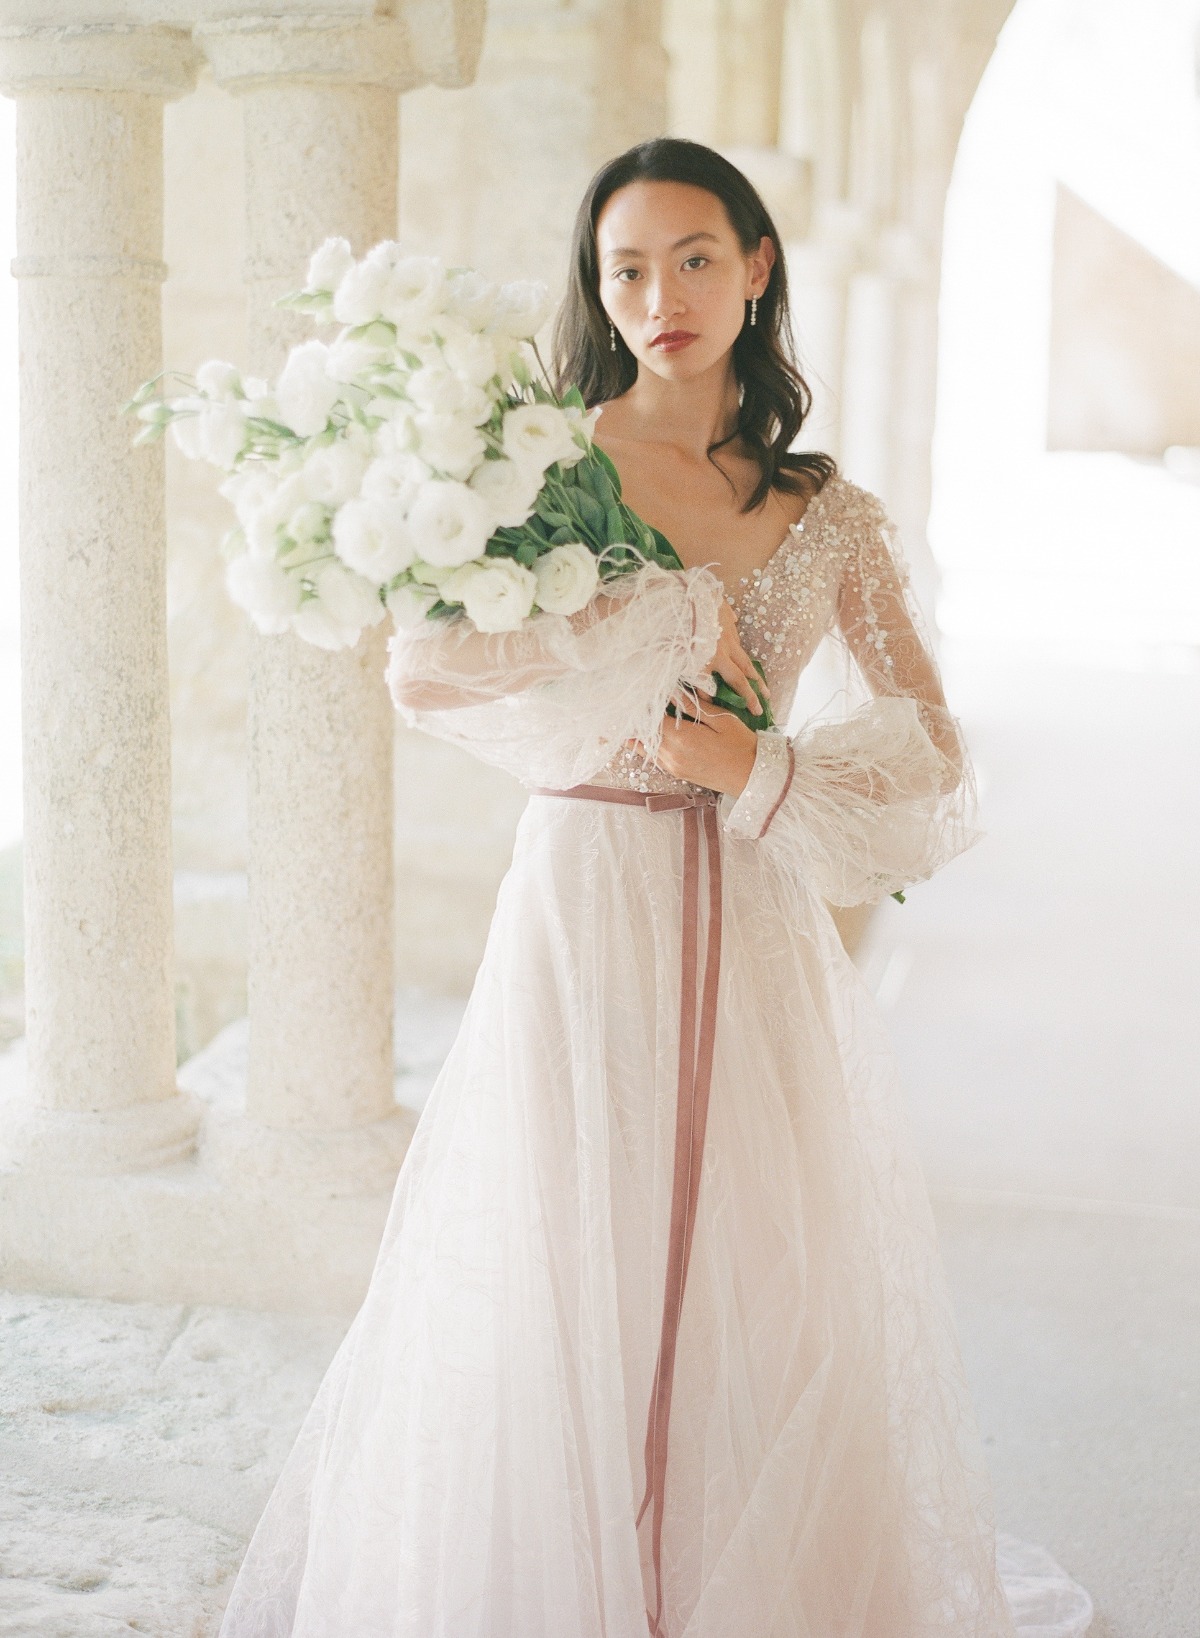 Vineyard Vibes and Old World Charm Come Together for This Stunning Styled Shoot In South West France